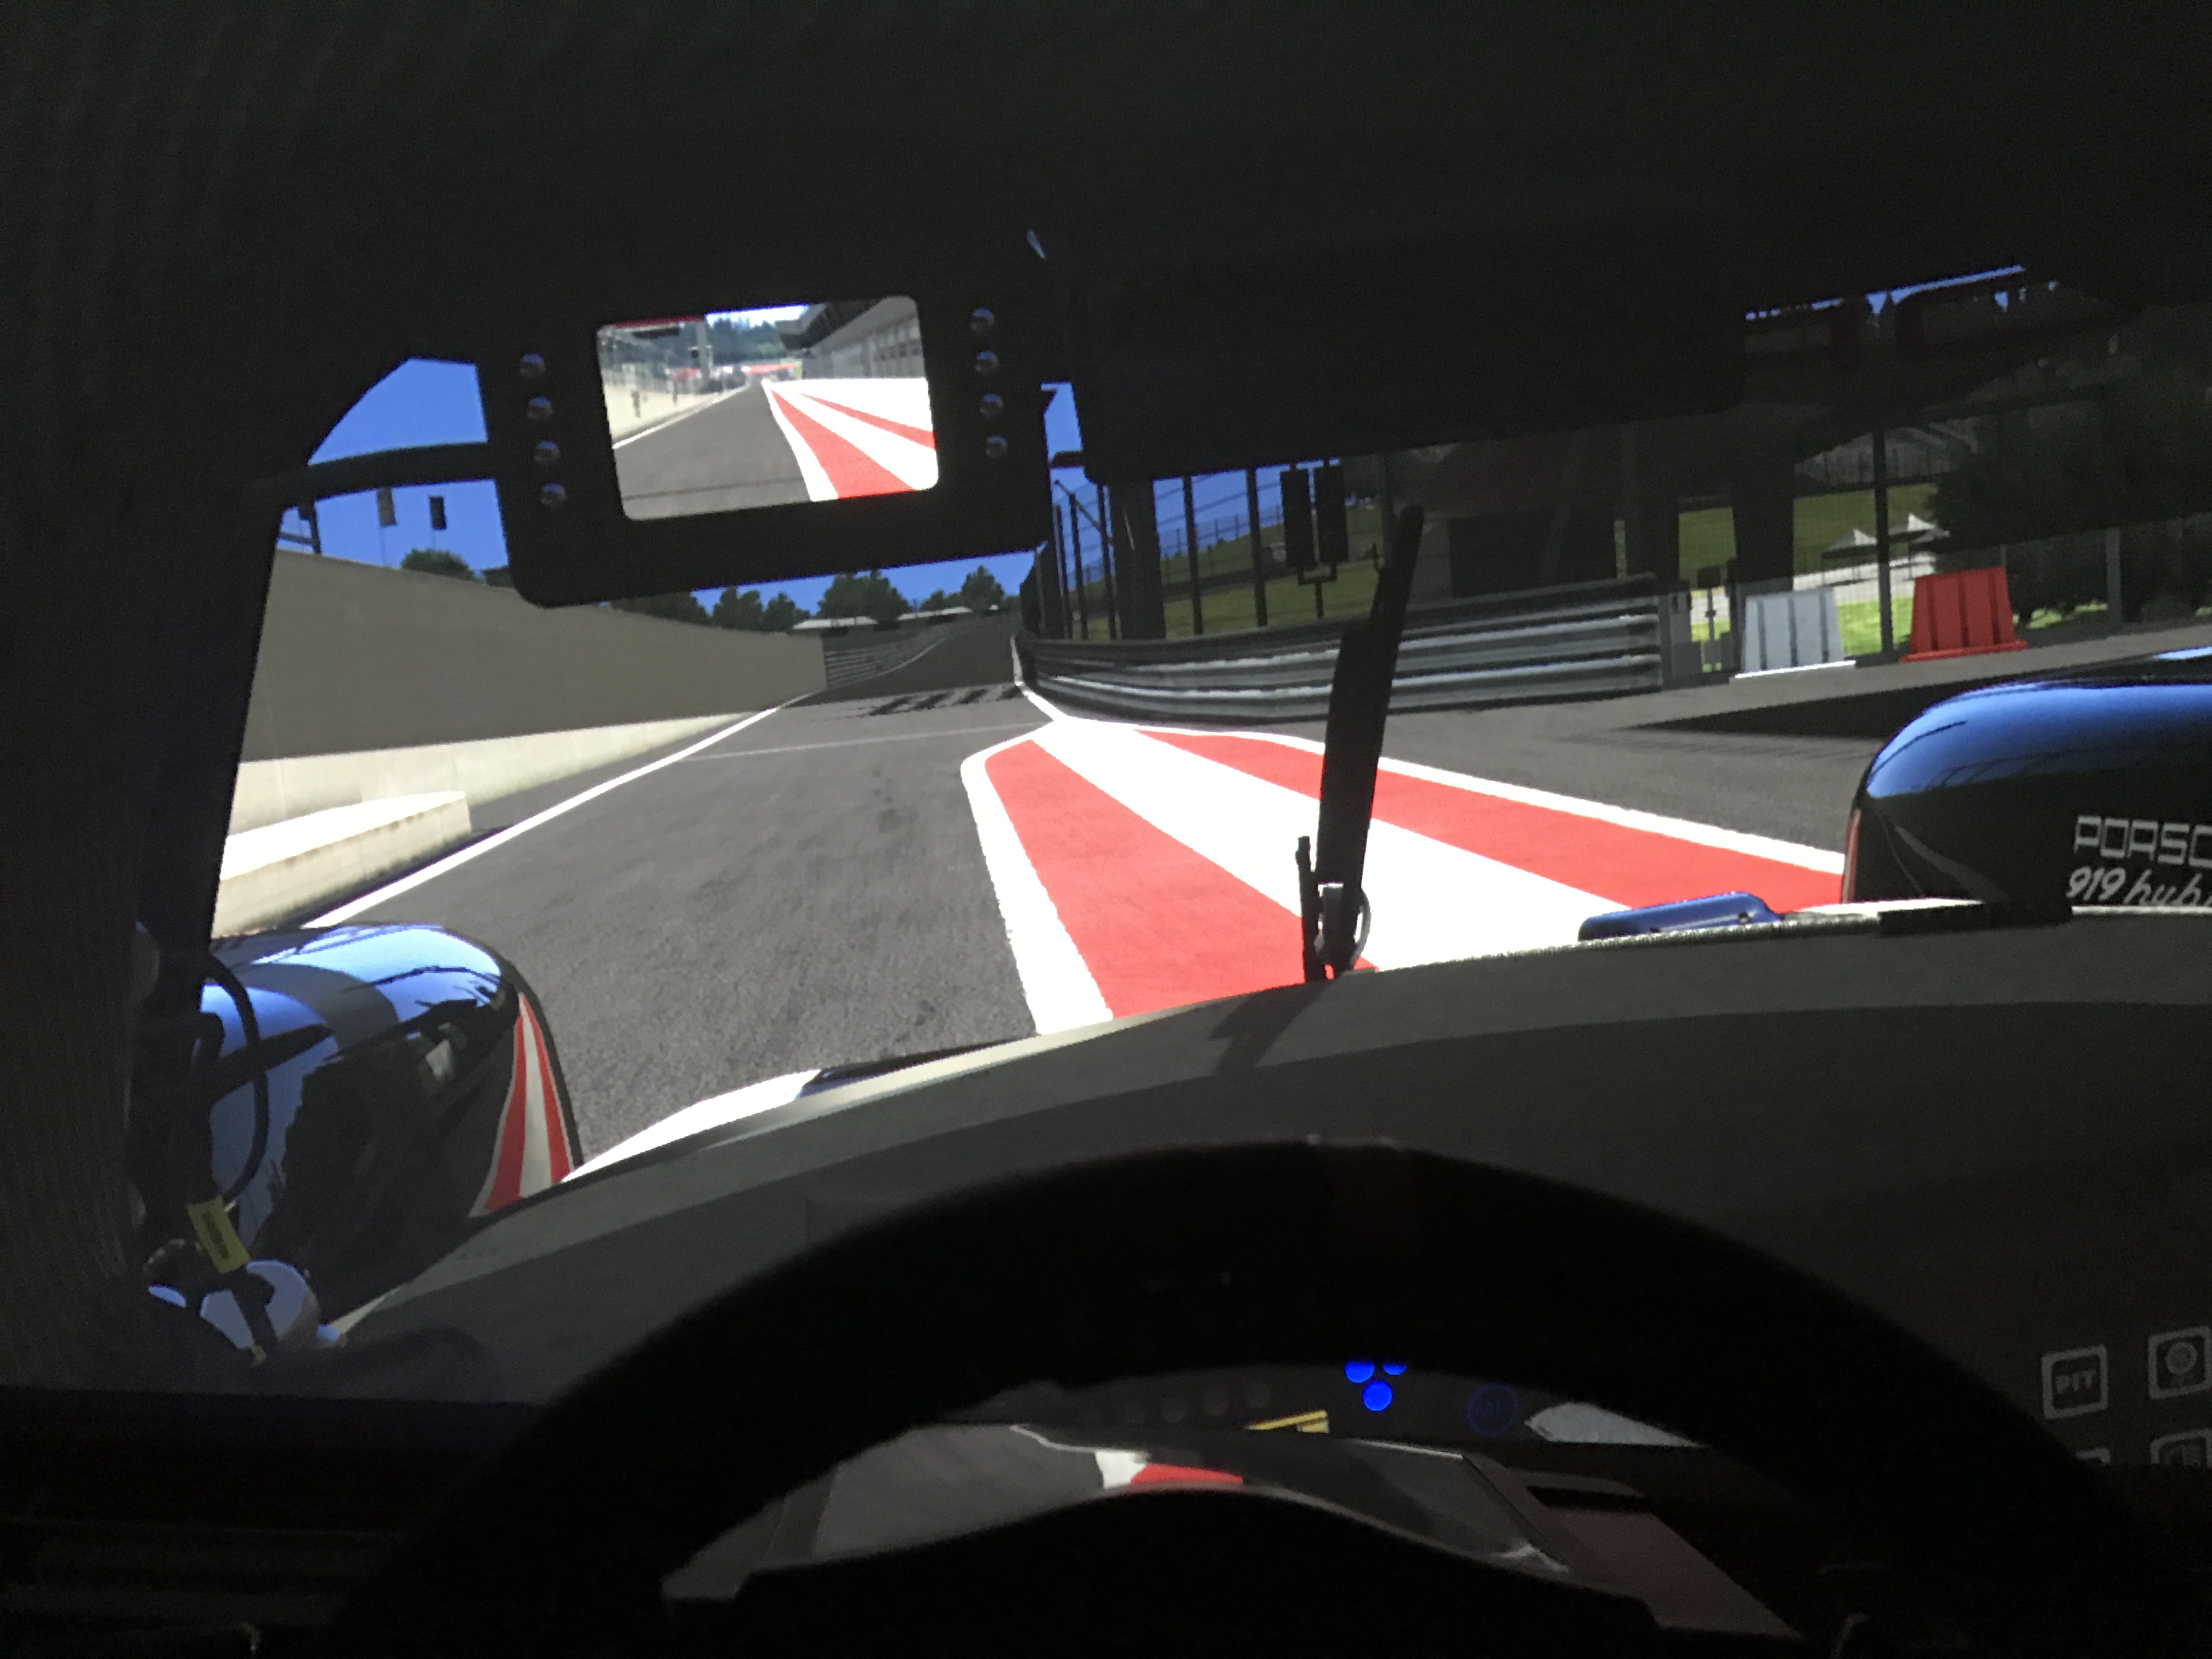 Entry in to VR Sim Racing